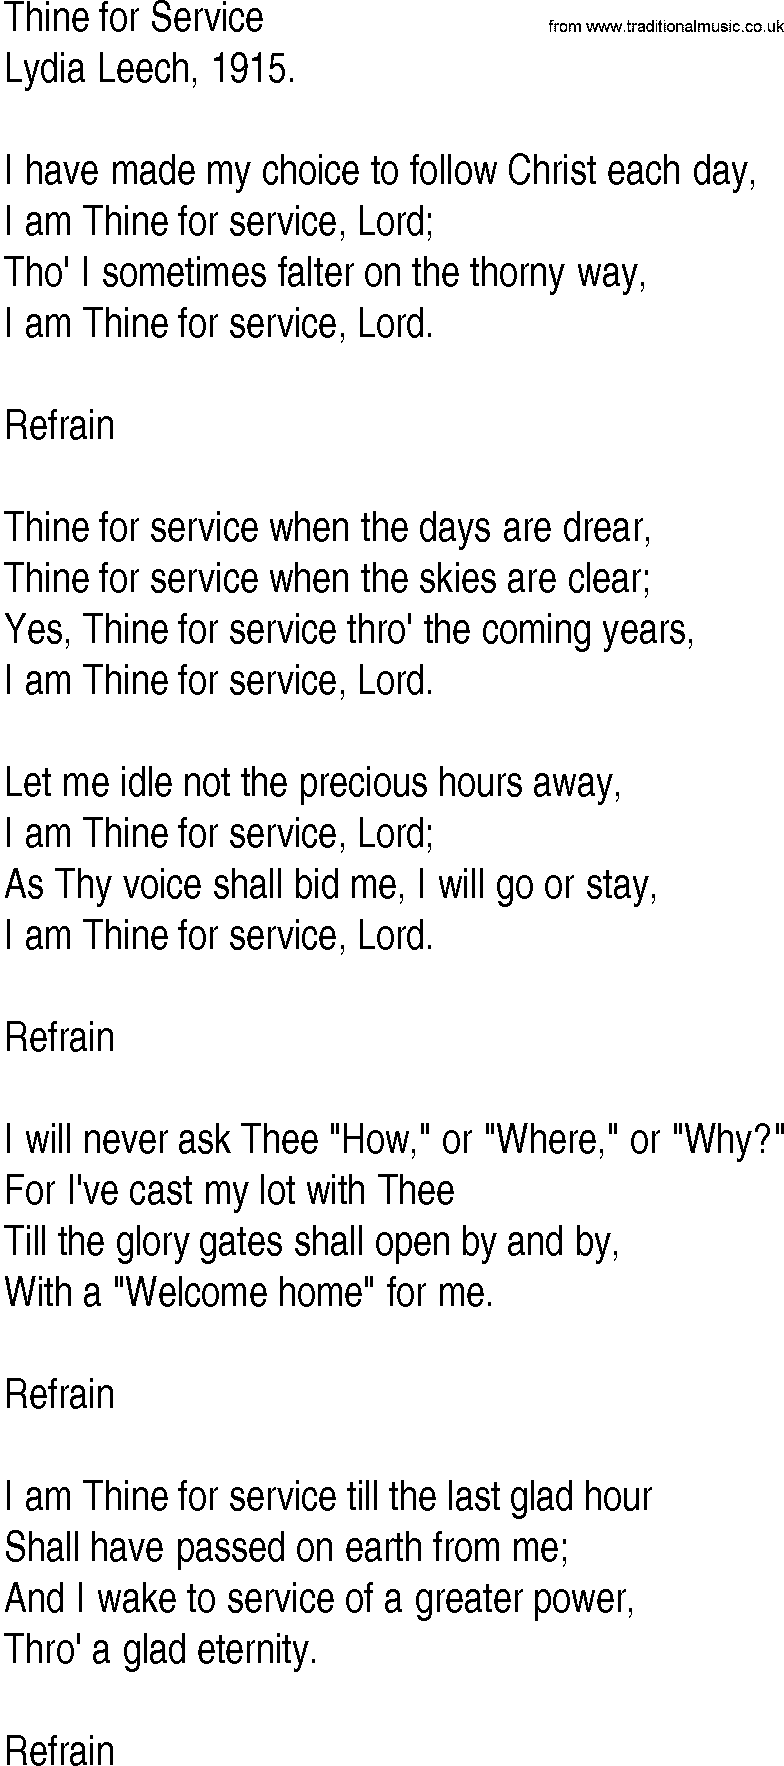 Hymn and Gospel Song: Thine for Service by Lydia Leech lyrics